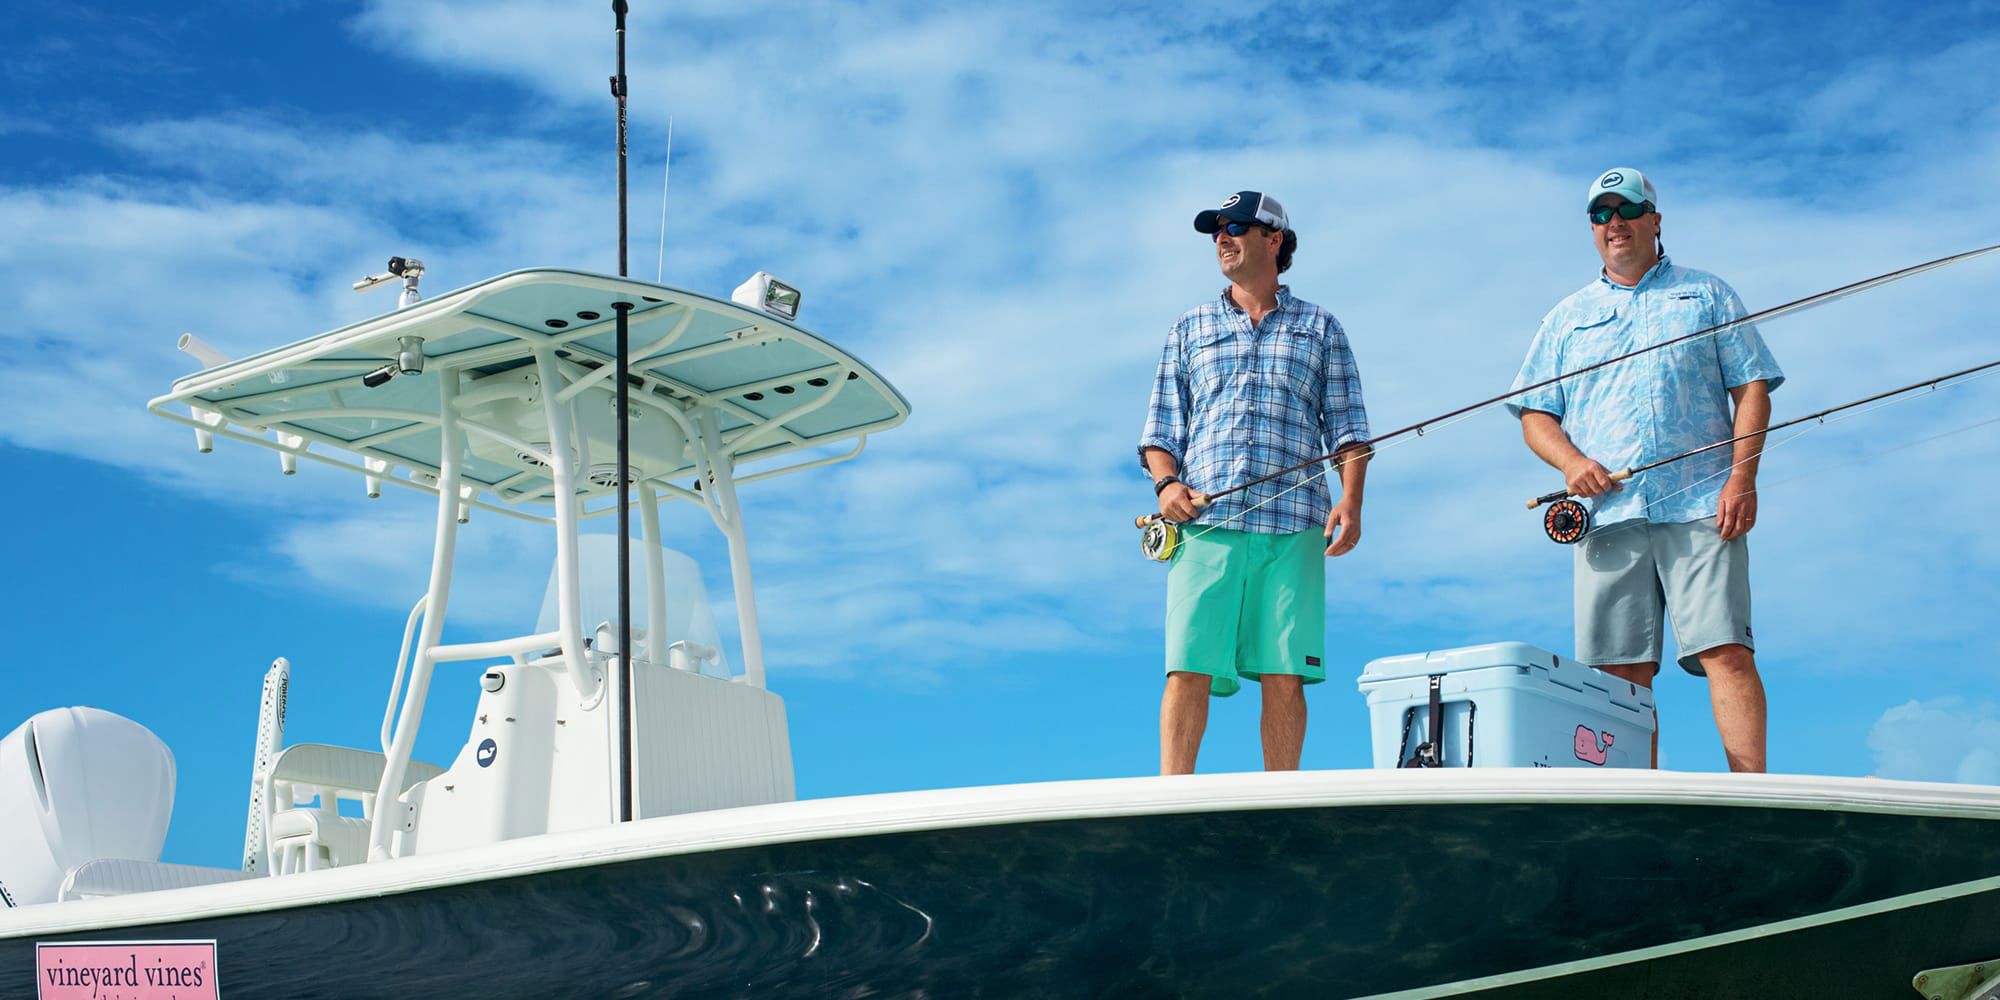 Two men on boat holding fishing poles near a cooler with a vineyard vines sticker.